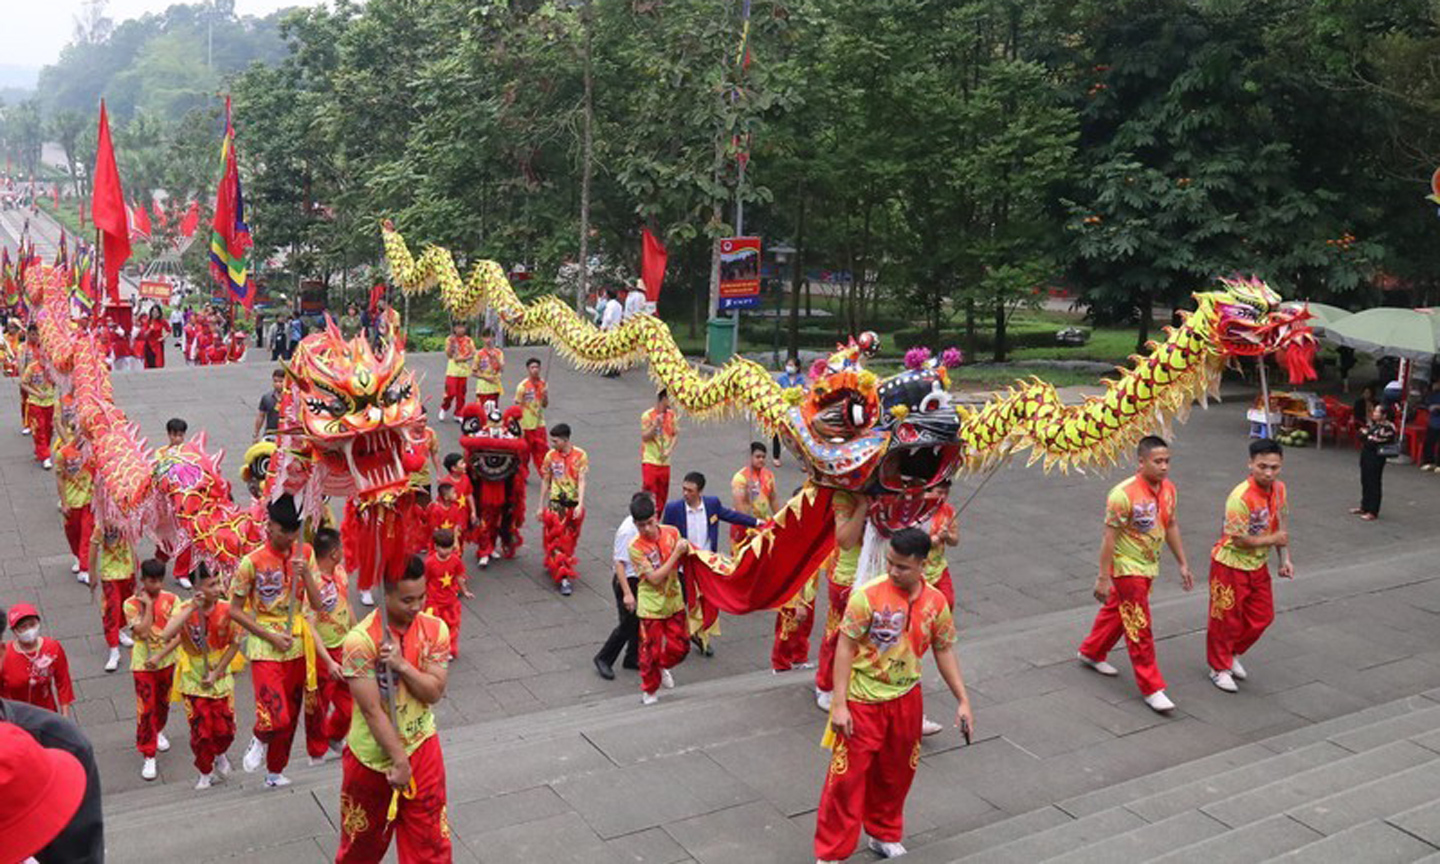 The procession is led by a team of lion and dragon dancers.